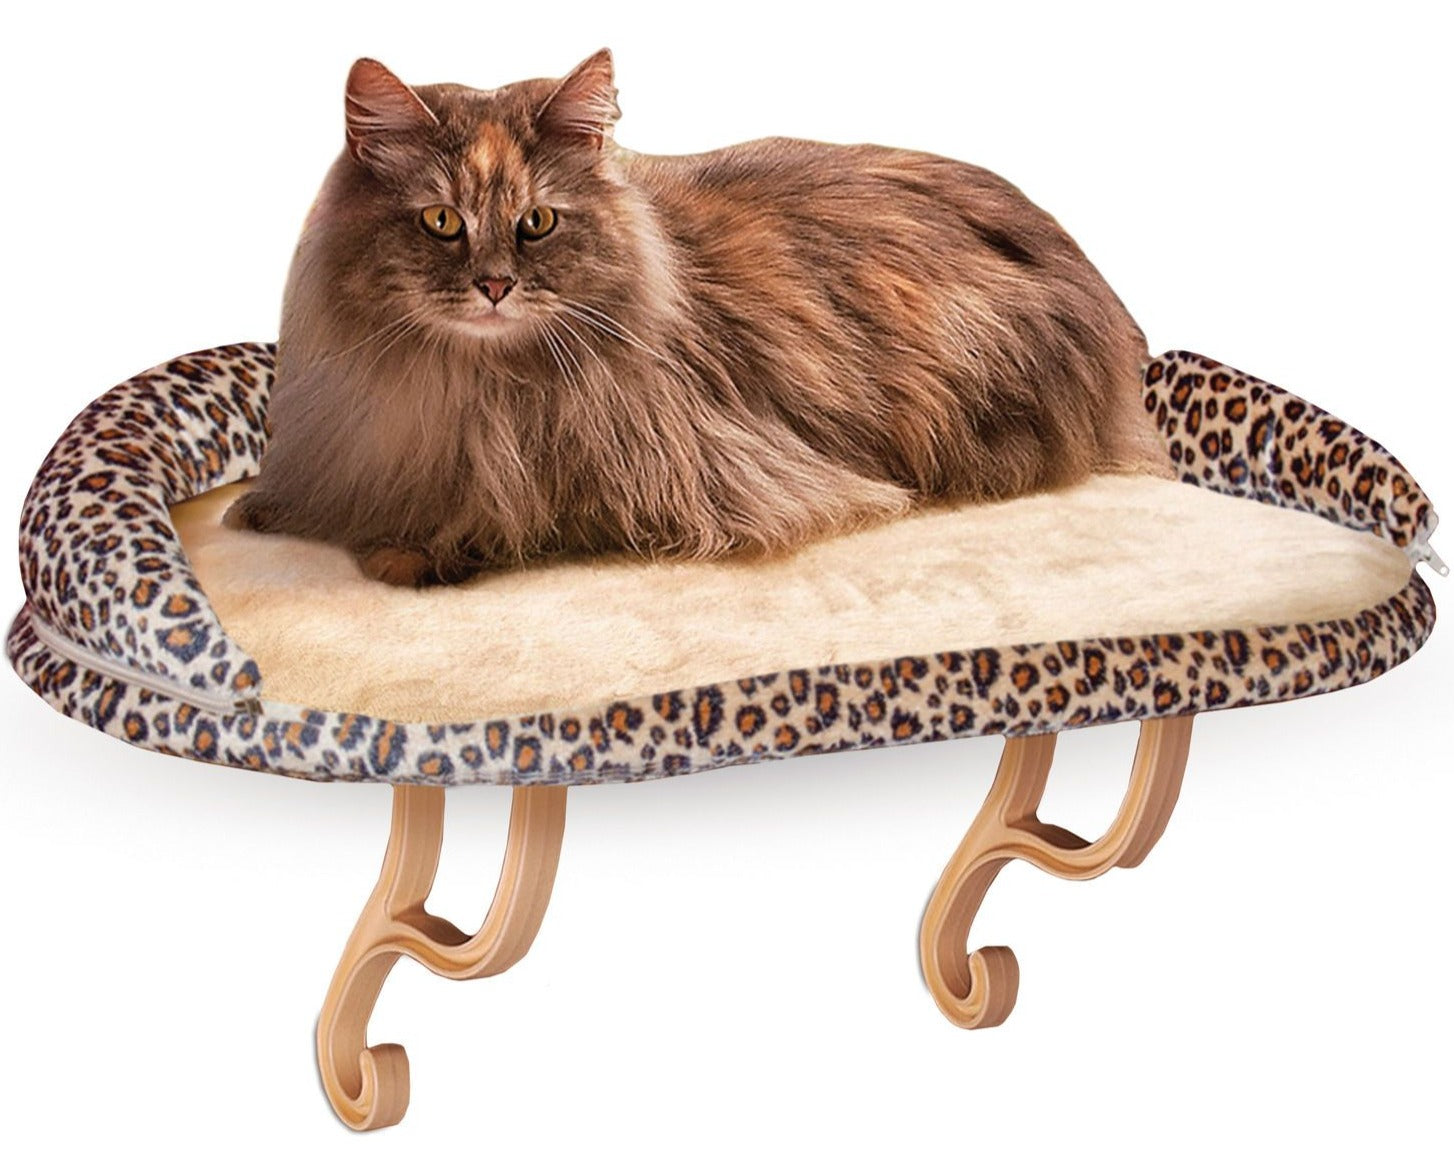 K&H Pet Products Deluxe Kitty Sill with Bolster Leopard 14″ x 24″ x 10″ – KH9097